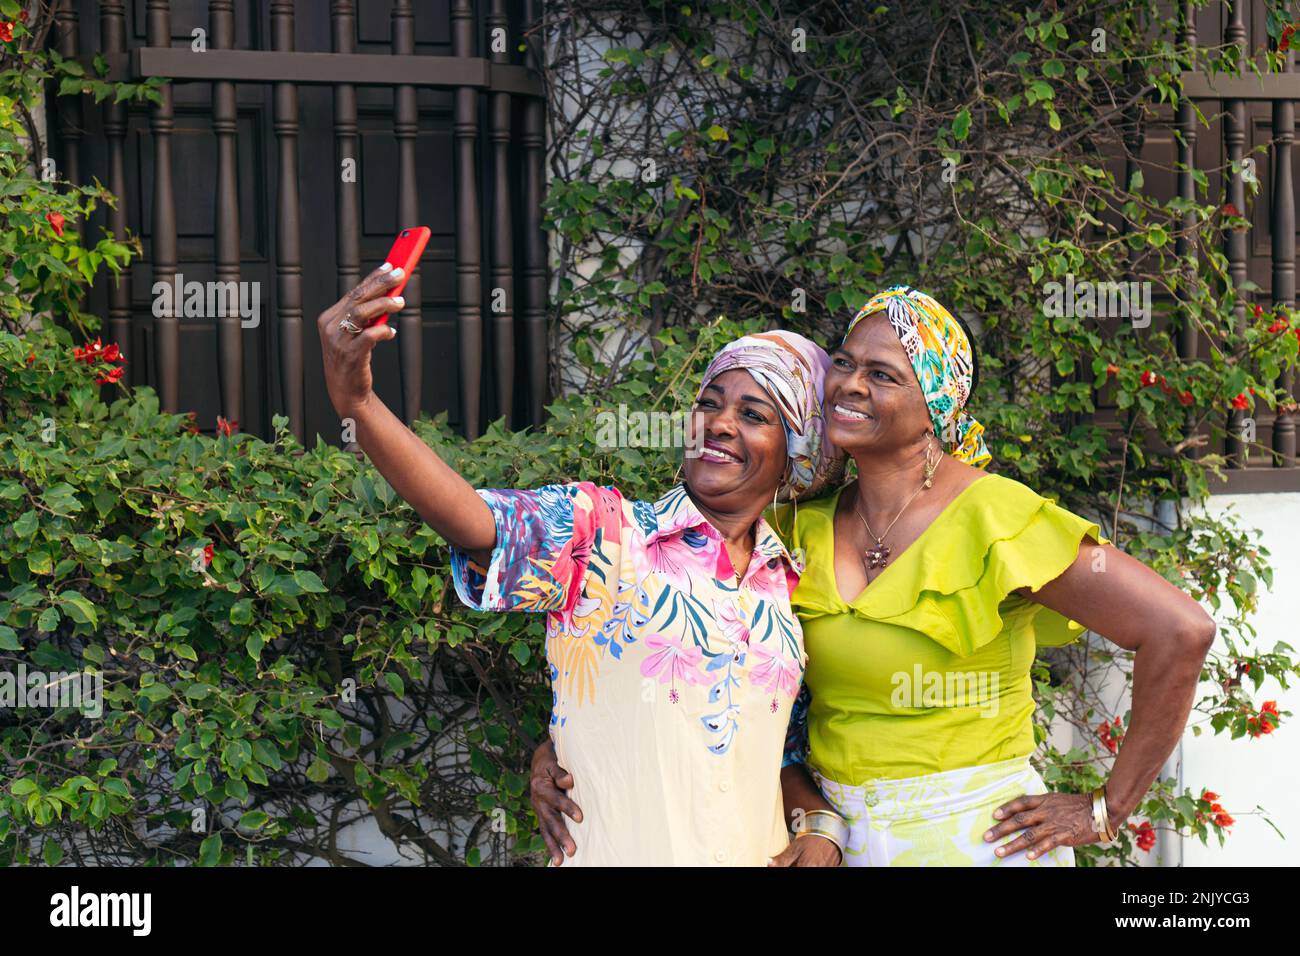 Smiling ethnic girlfriends in summer clothes and headscarfs taking selfie on mobile phone while spending weekend together in city Stock Photo